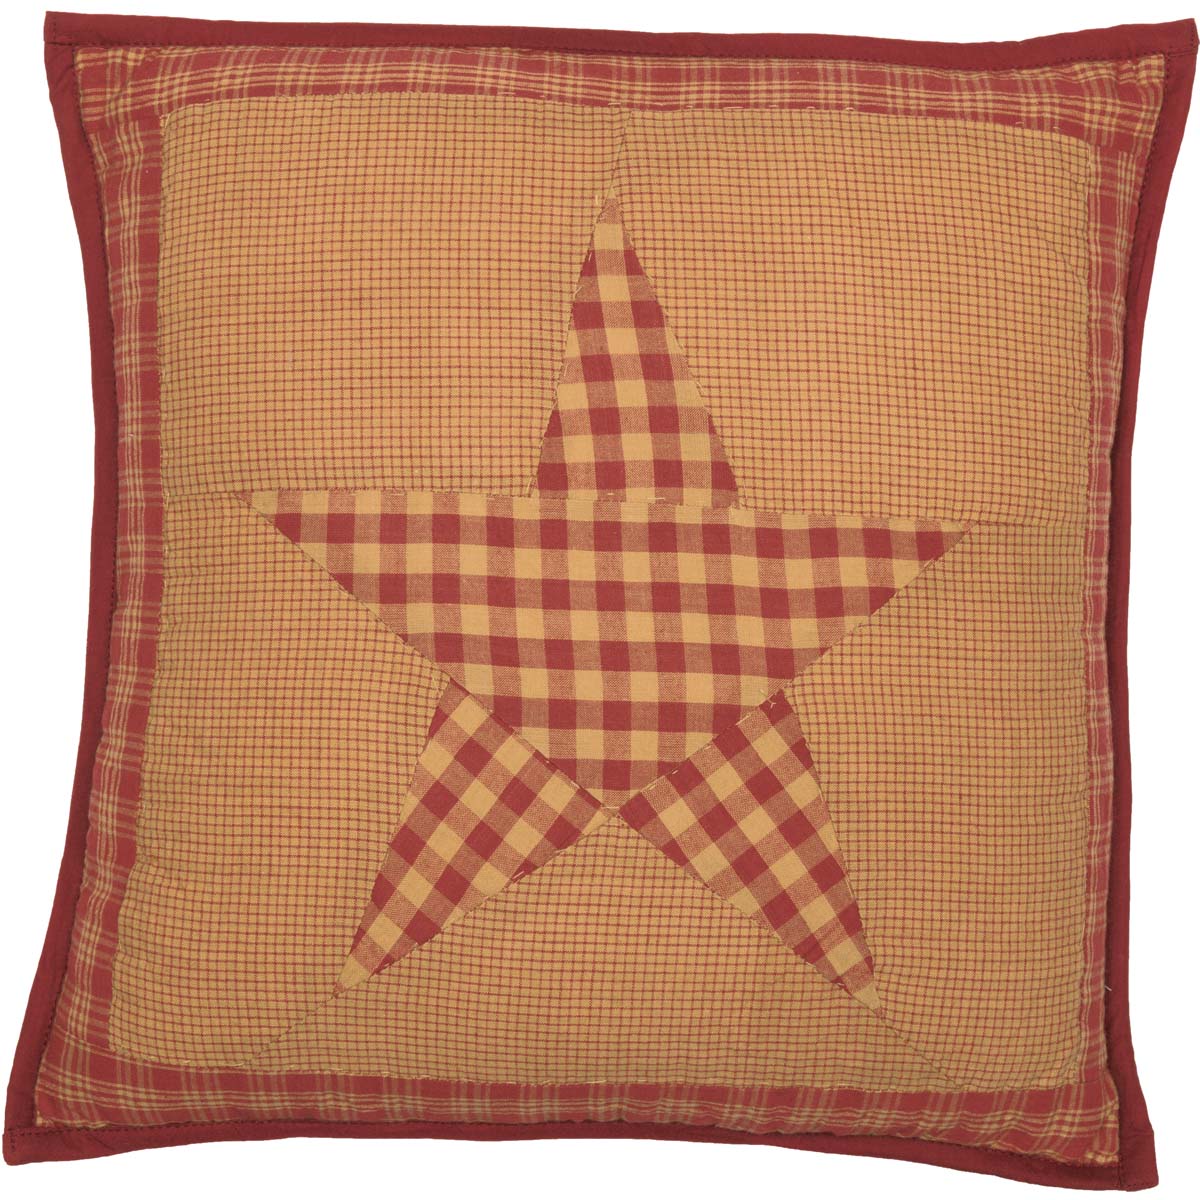 Ninepatch Star Quilted Pillow 16x16 VHC Brands